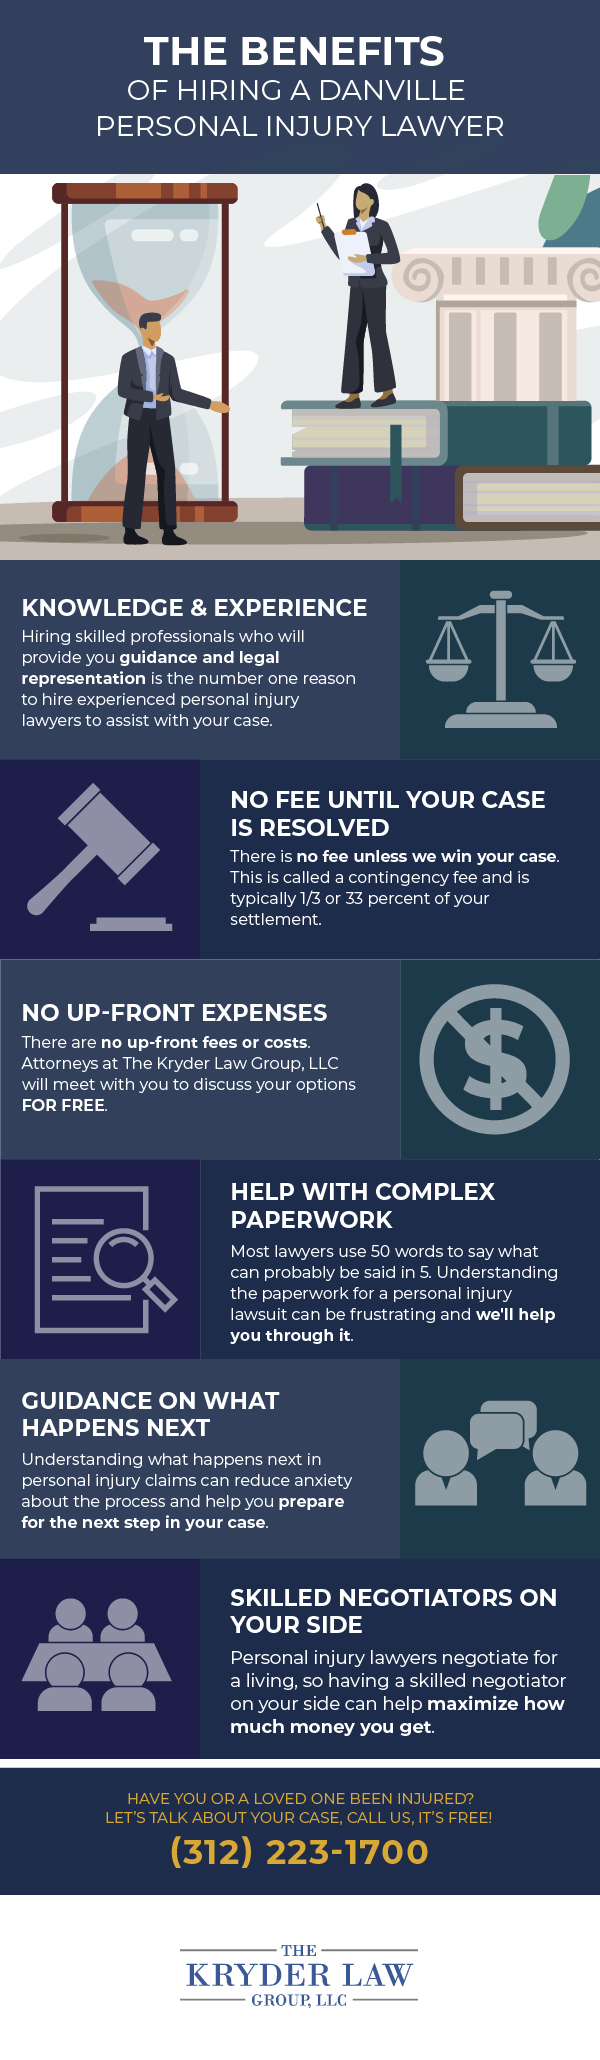 Danville Personal Injury Lawyer Infographic